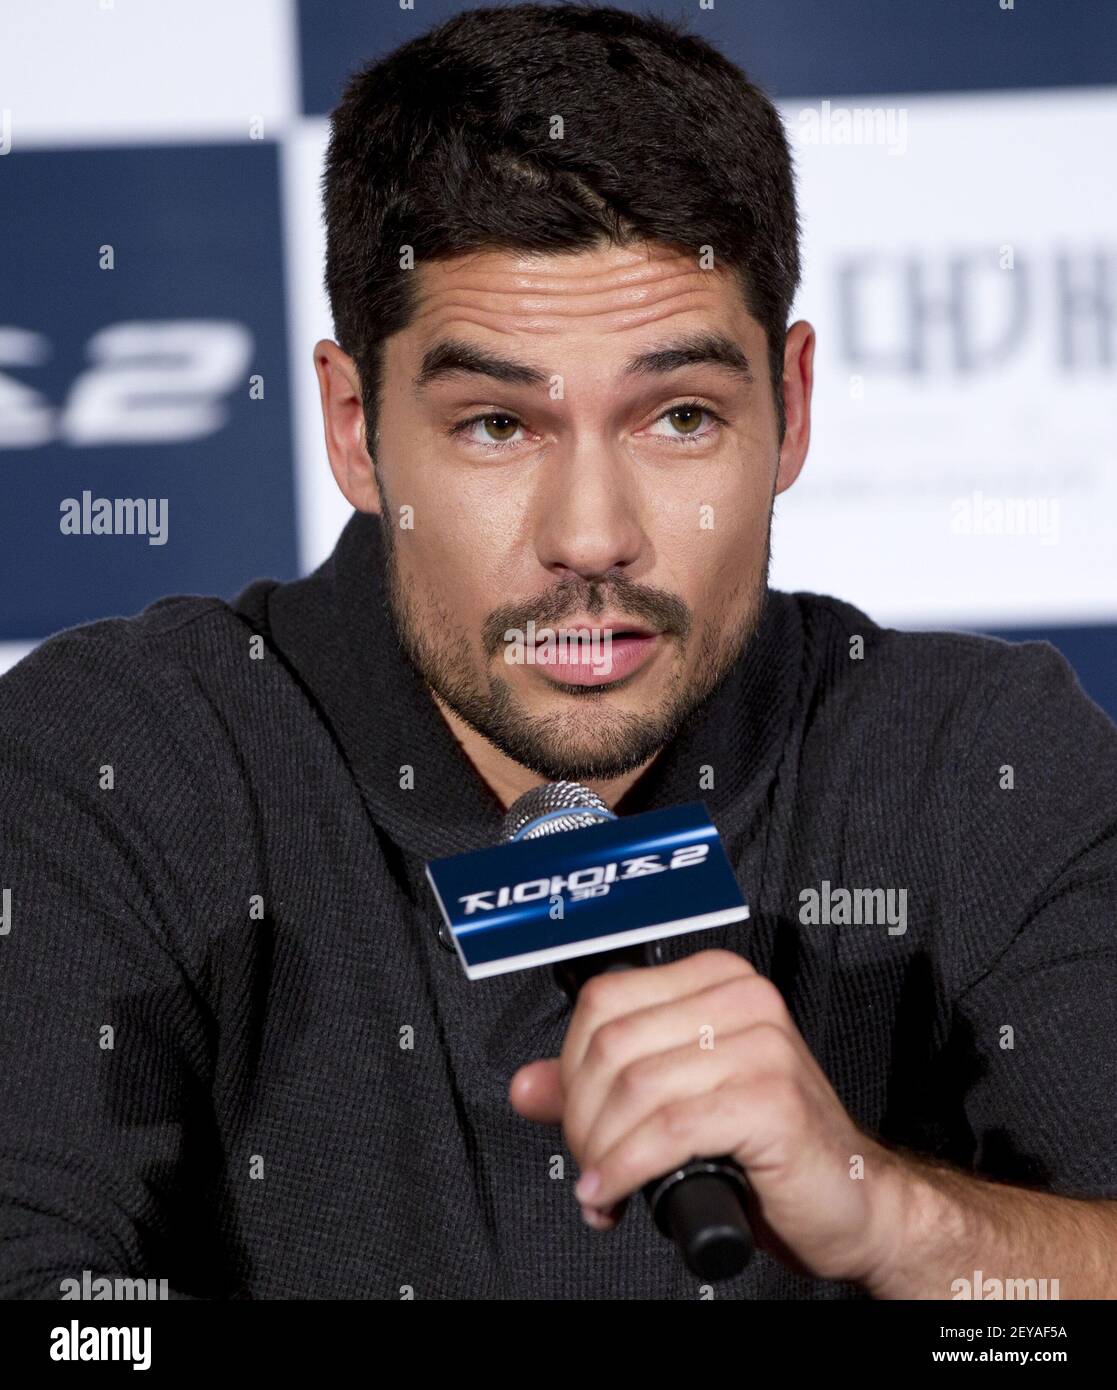 Actor . Cotrona, attends a press conference for the movie 'G. I.  Joe:Retaliation' World premier at hotel in Seoul, South Korea on March 11,  2013. The movie is to be released in